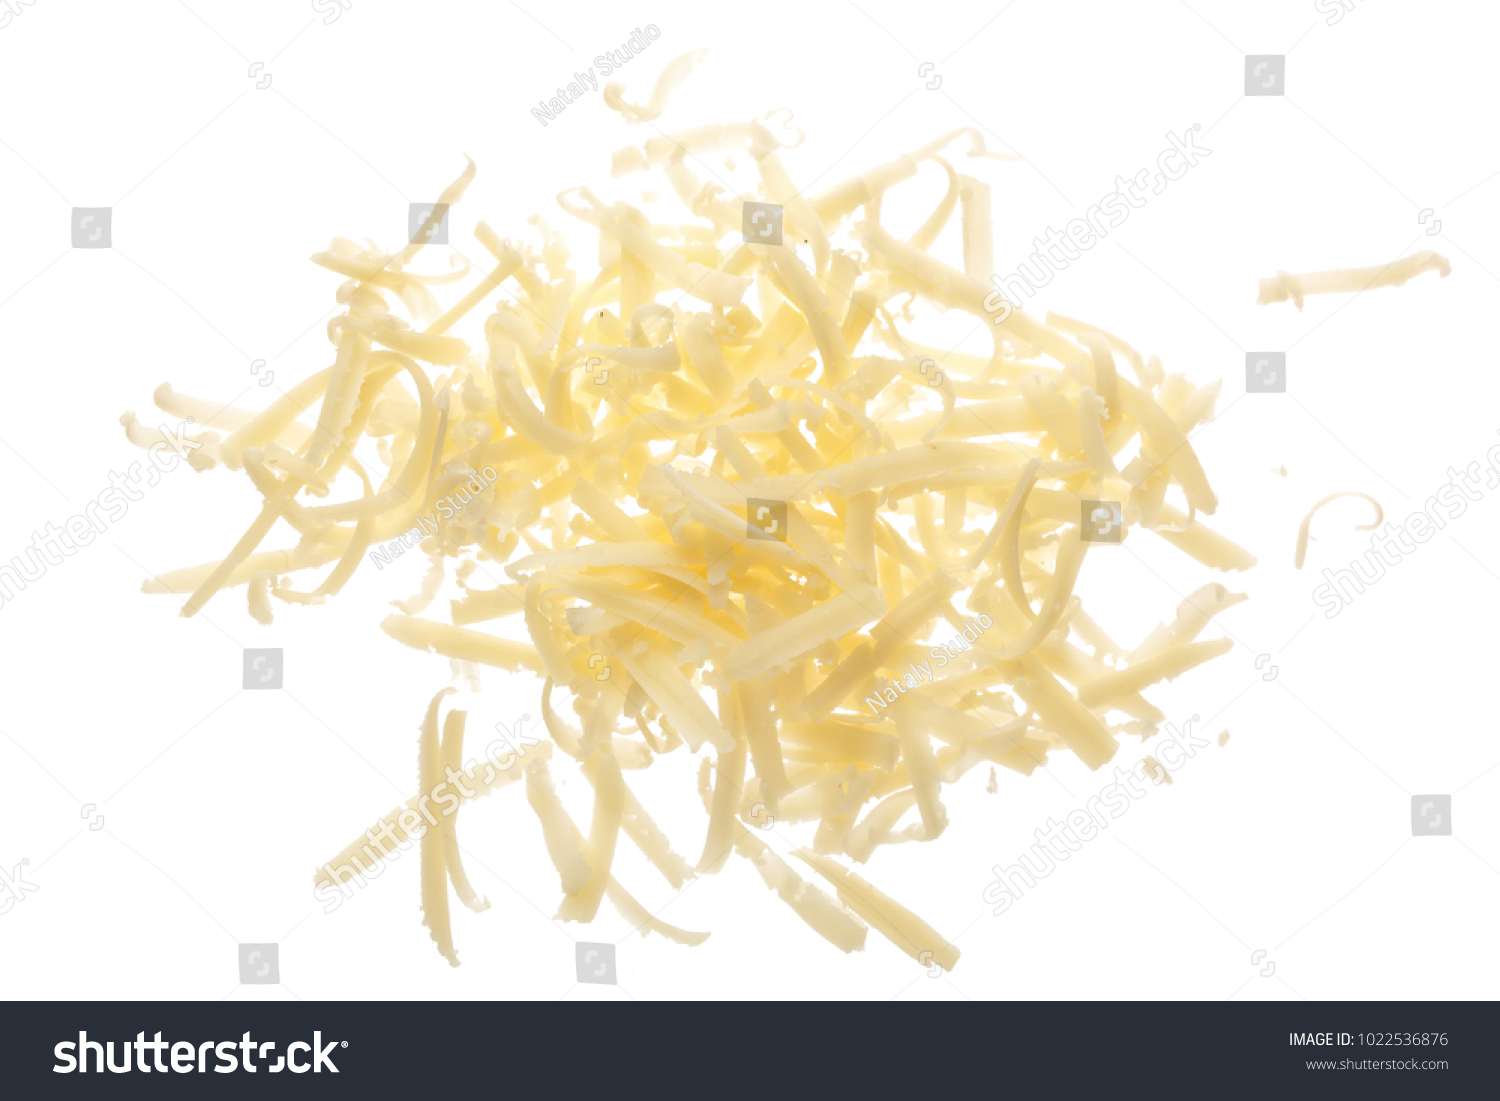 grated cheese isolated on white background. Top view #1022536876